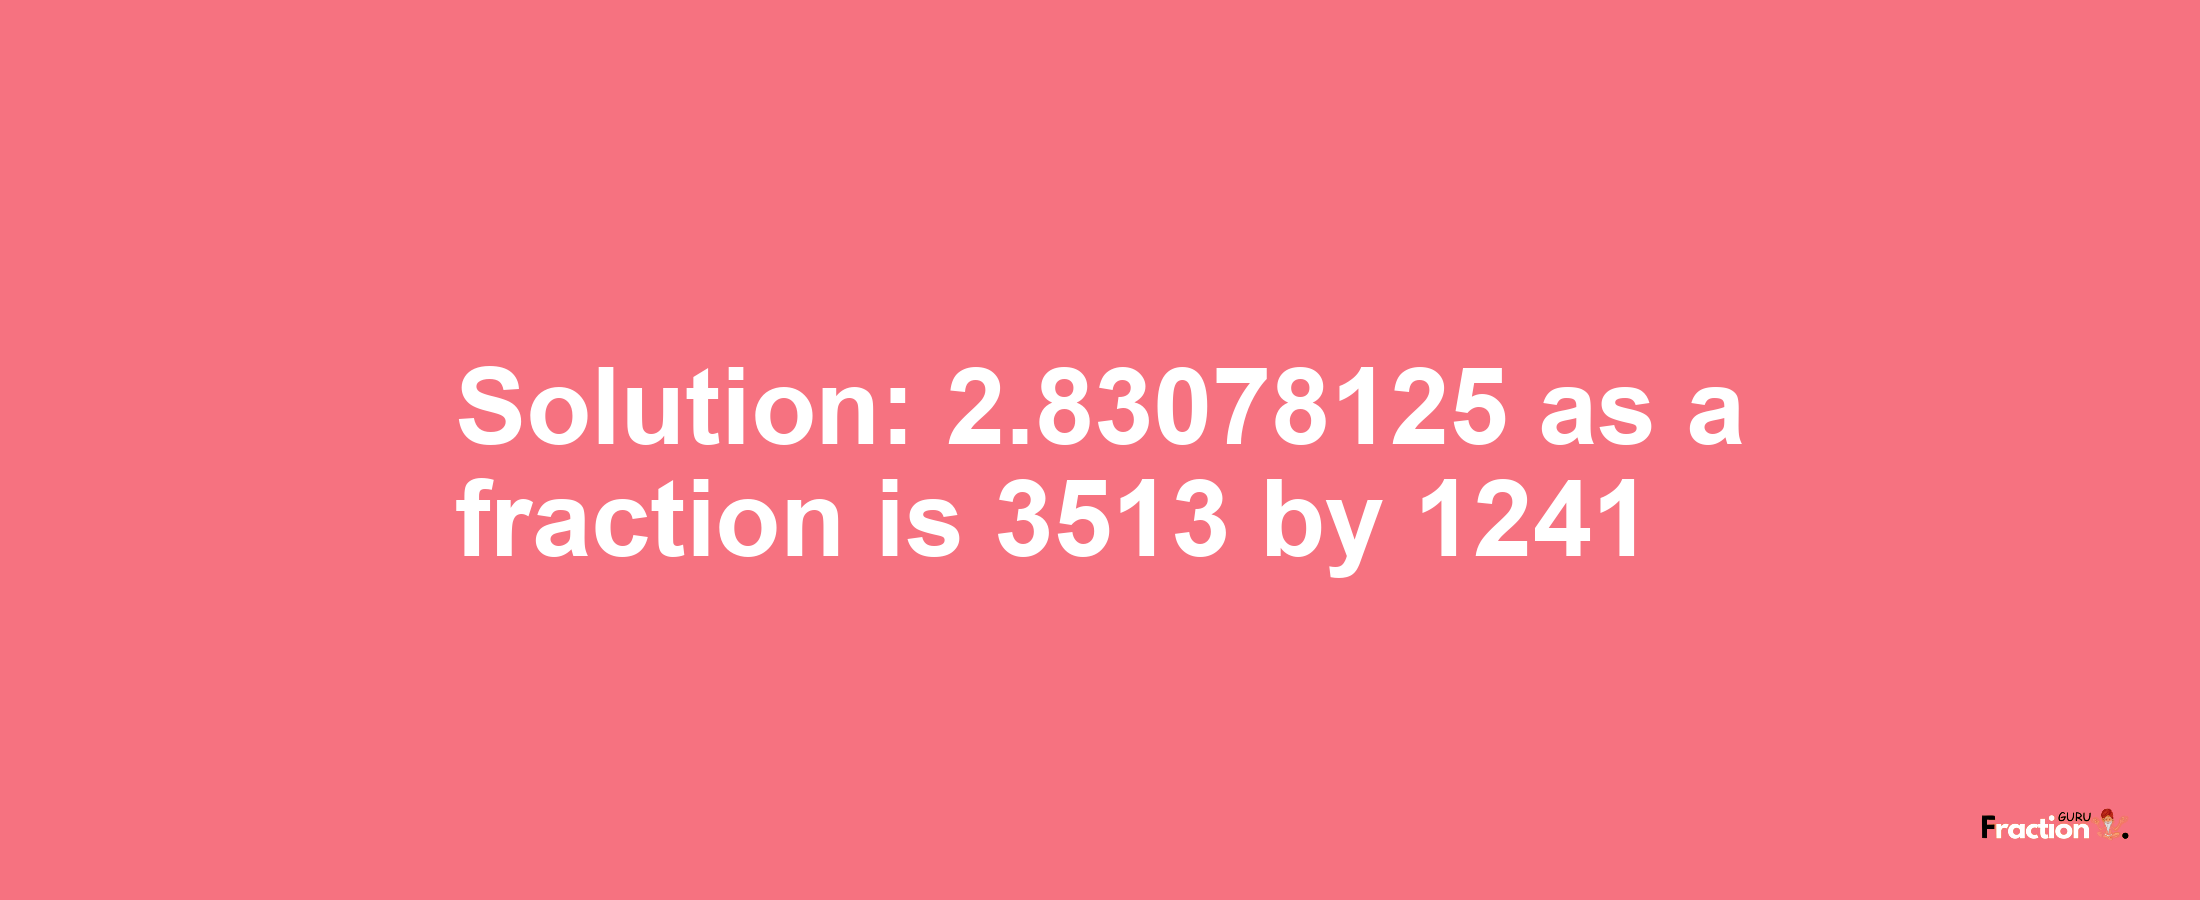 Solution:2.83078125 as a fraction is 3513/1241